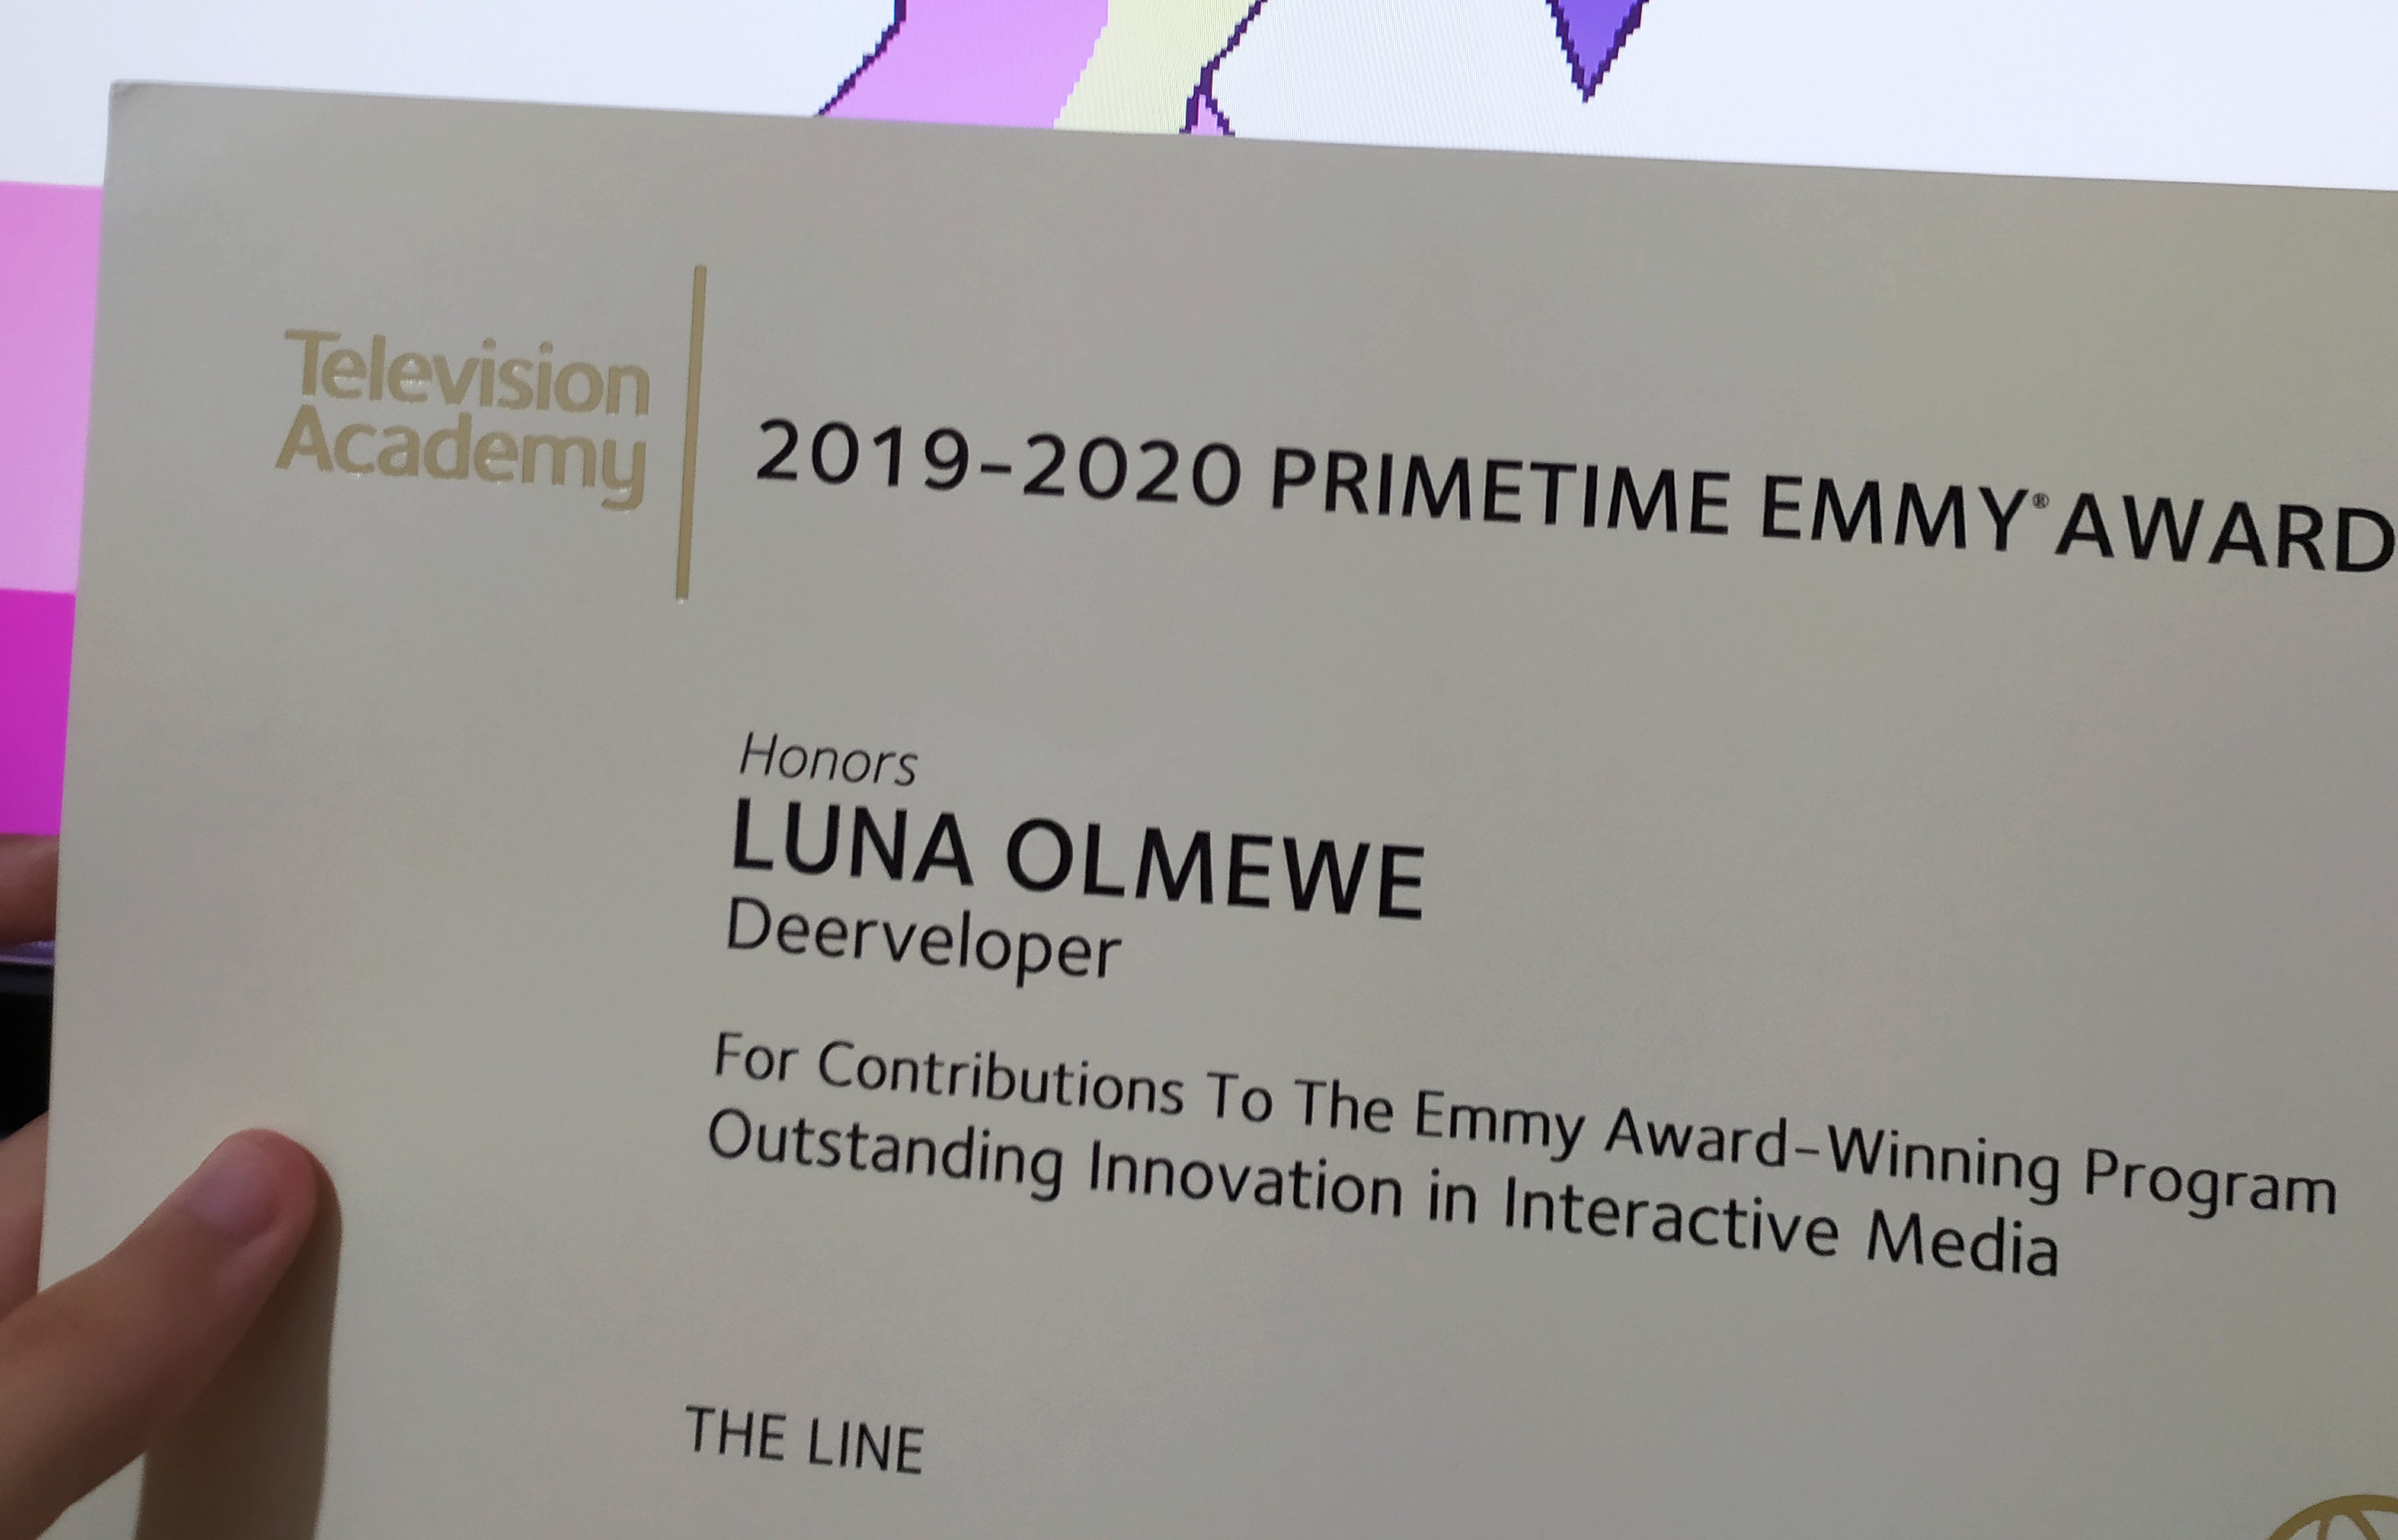 an award certificate, written "Television Academy; 2019-2020 Primetime Emmy Award; Honors LUNA OLMEWE, Deerveloper, For Contributions To The Emmy Award-Winning Program; Outstanding Innovation in Interactive Media: THE LINE"